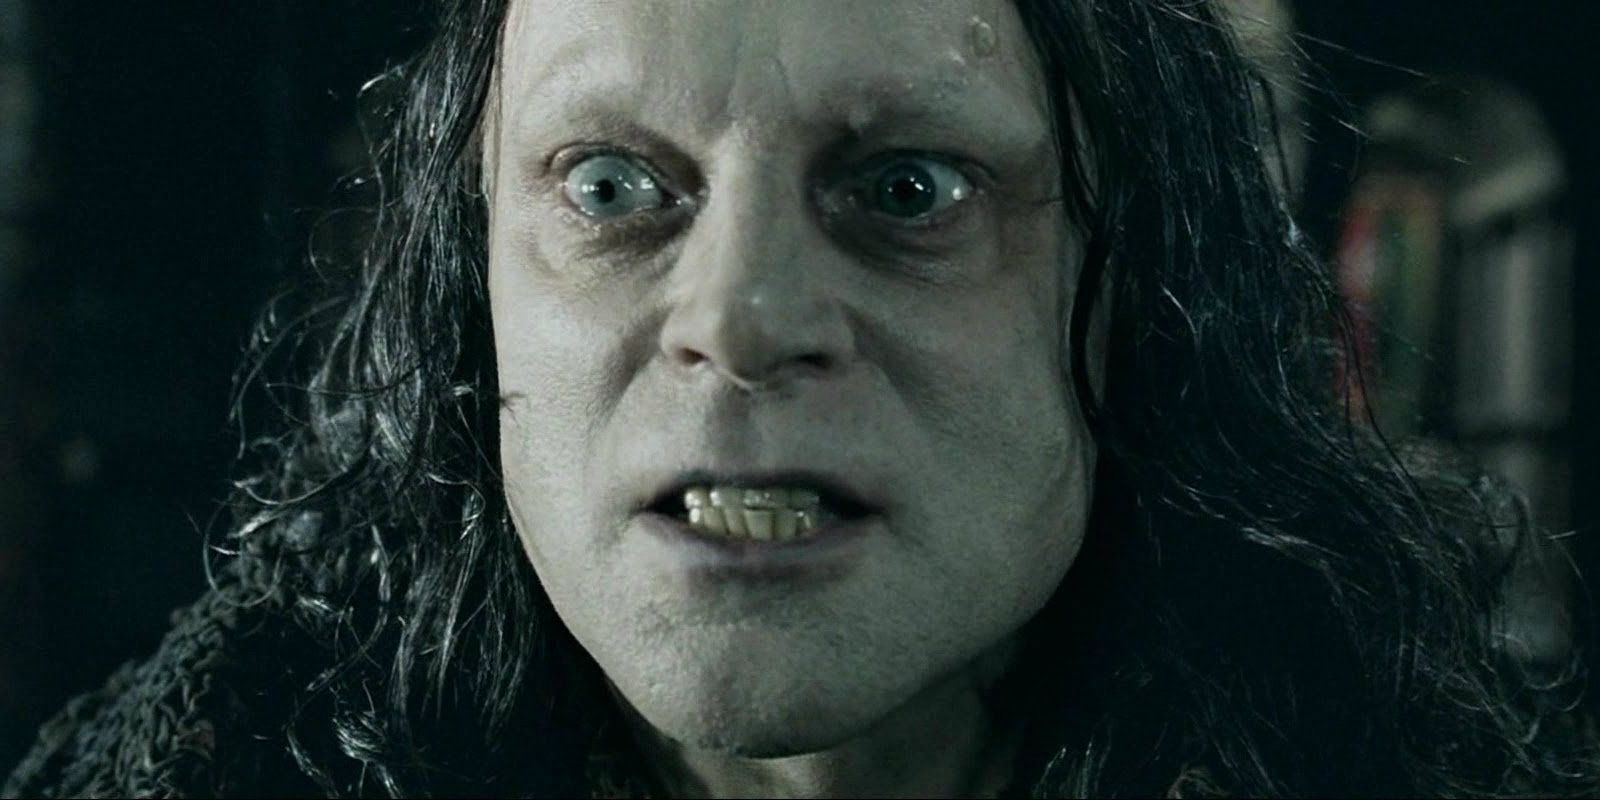 Wormtongue scowling in The Lord of the Rings